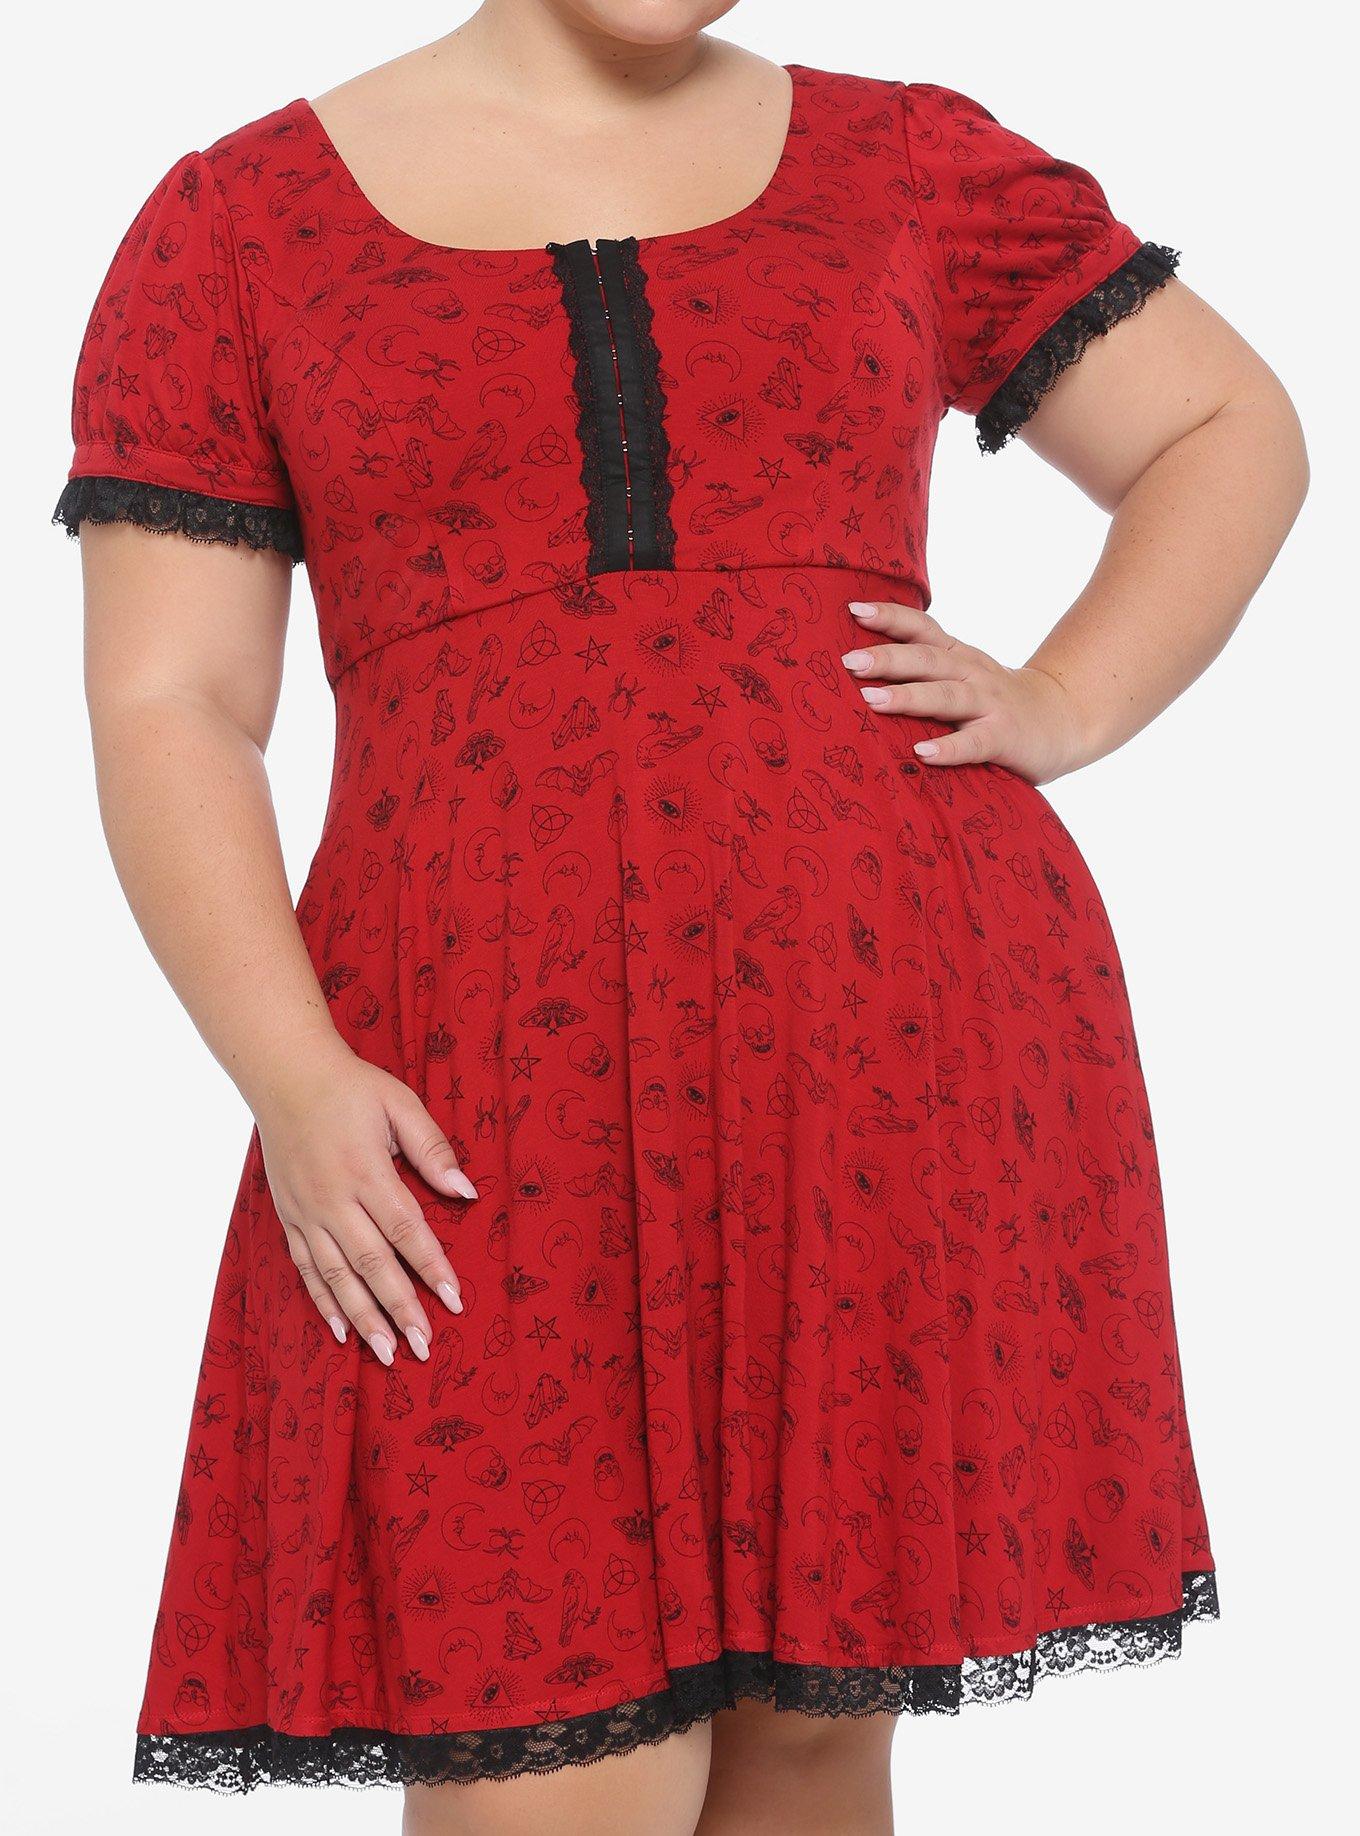 Red Alchemy Print Dress Plus Size, RED, hi-res